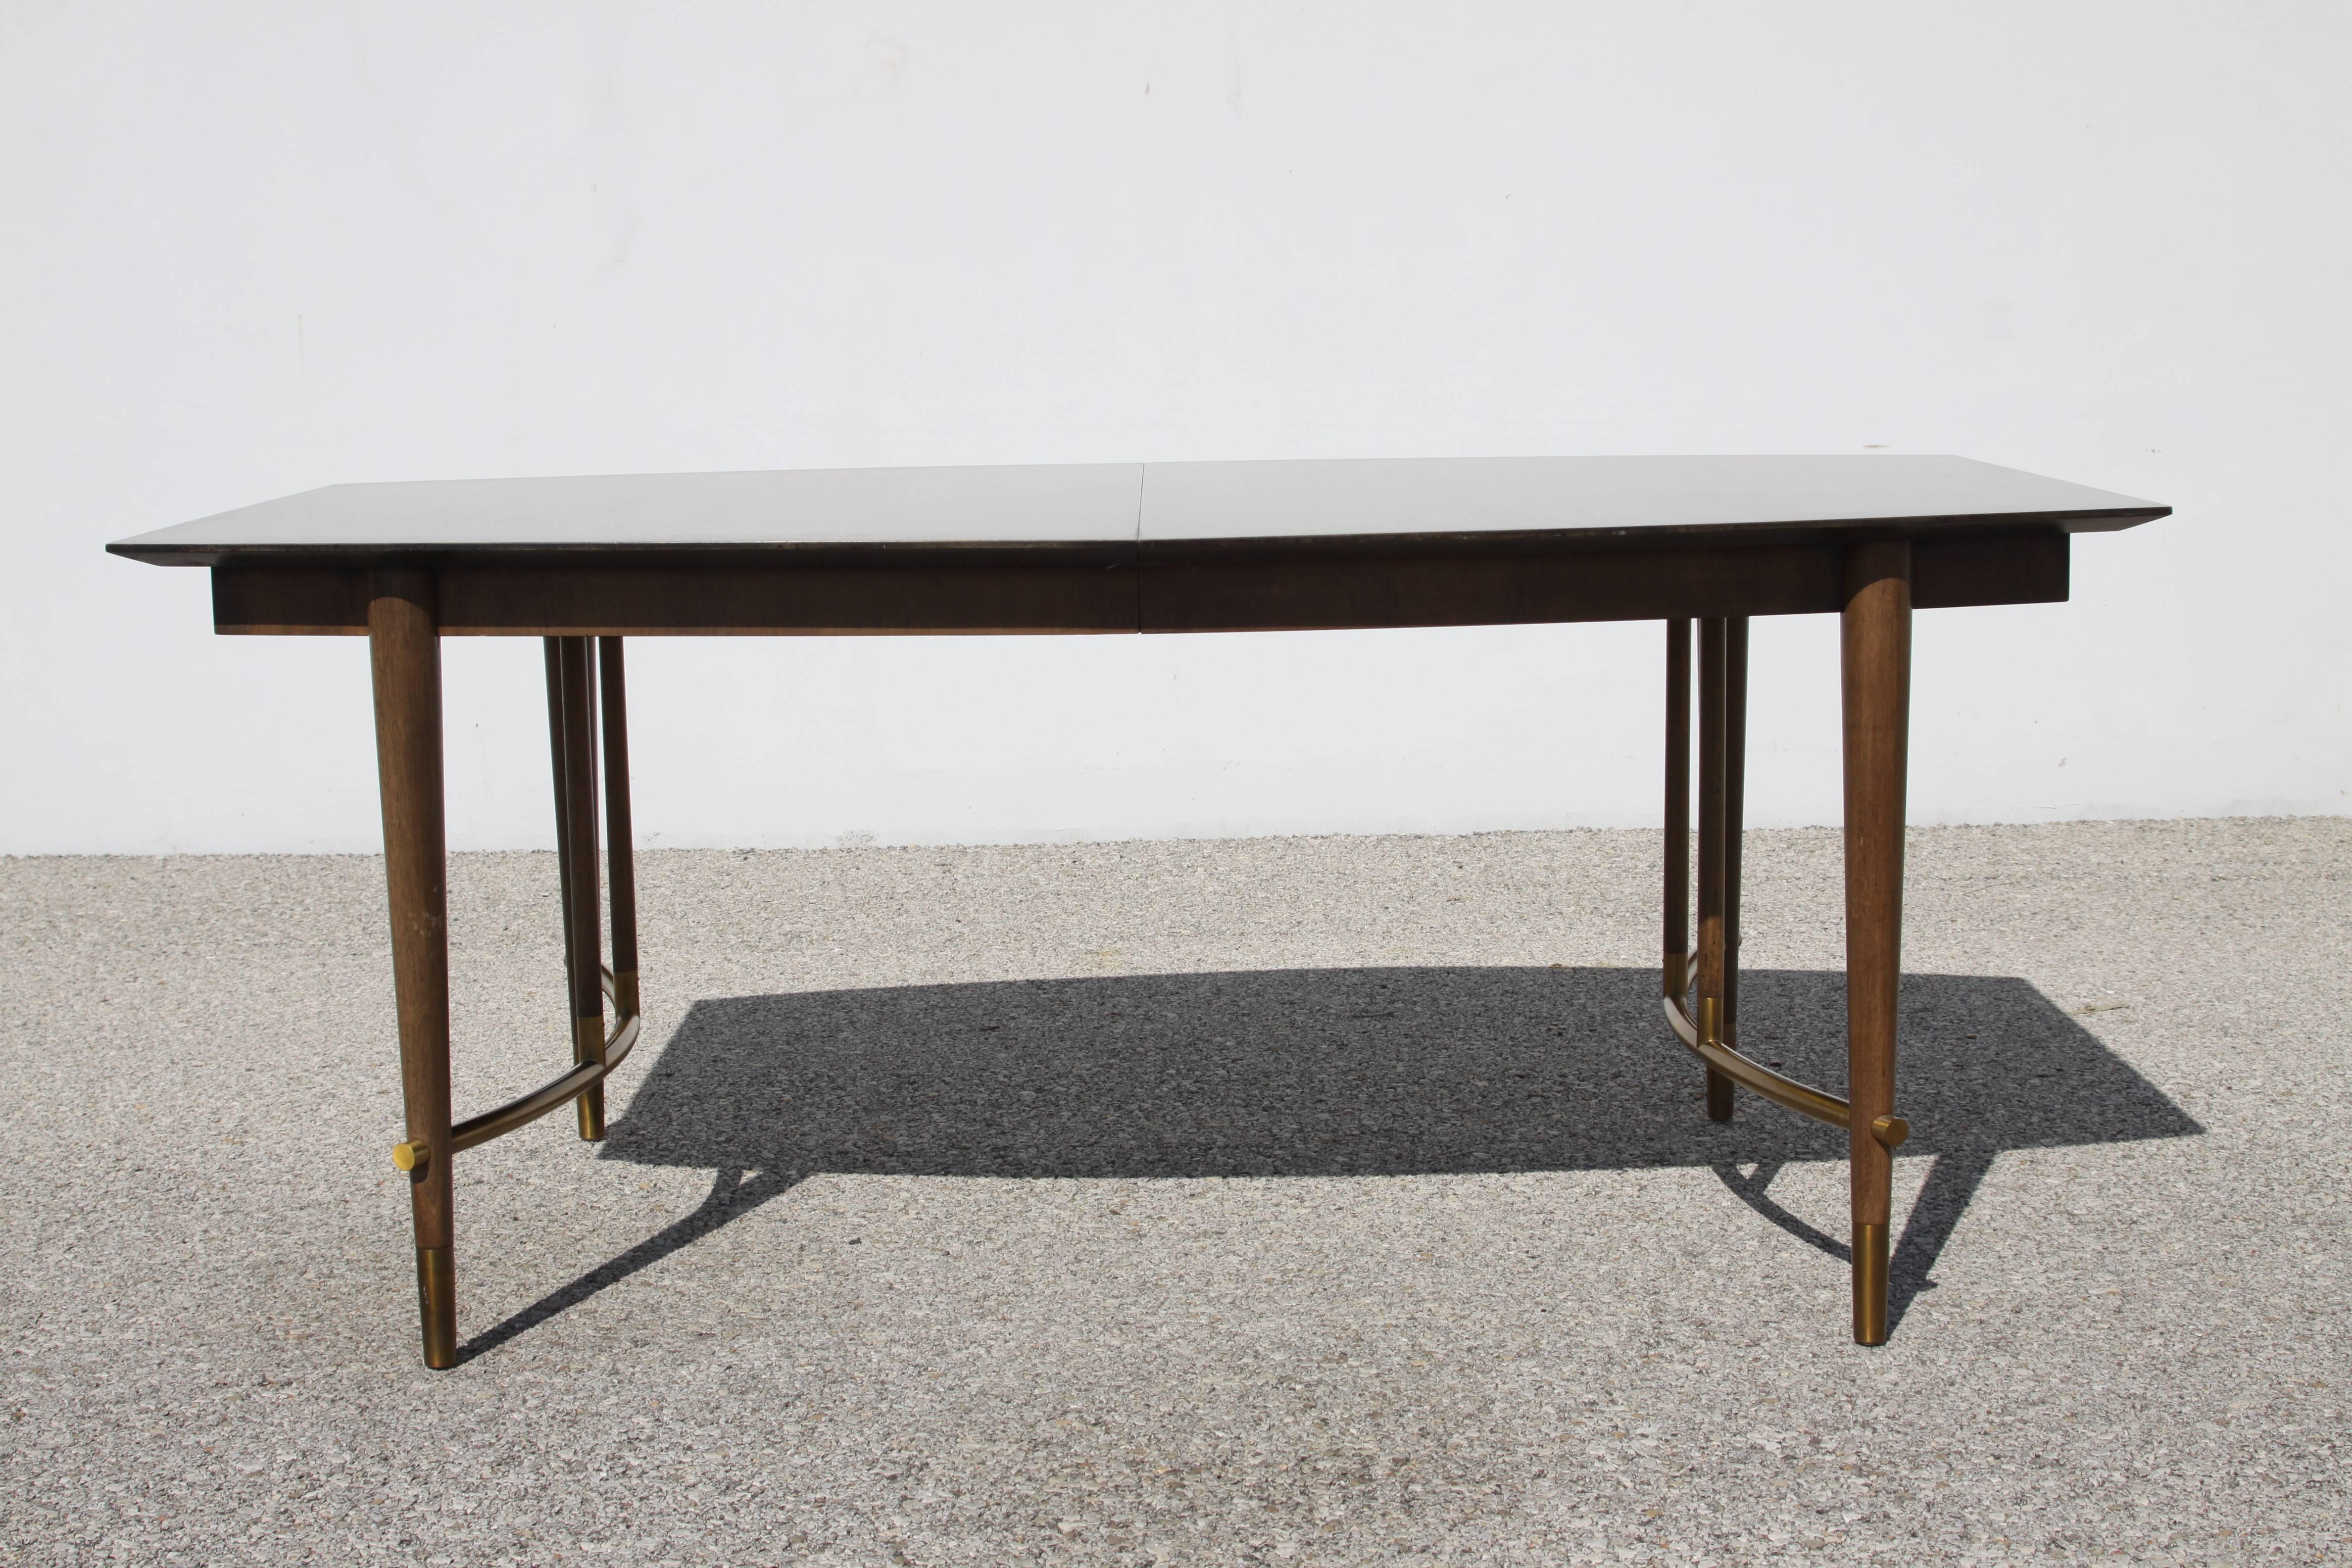 Mid-20th Century Bert England for Johnson Furniture Dining Table - Forward Trend For Sale